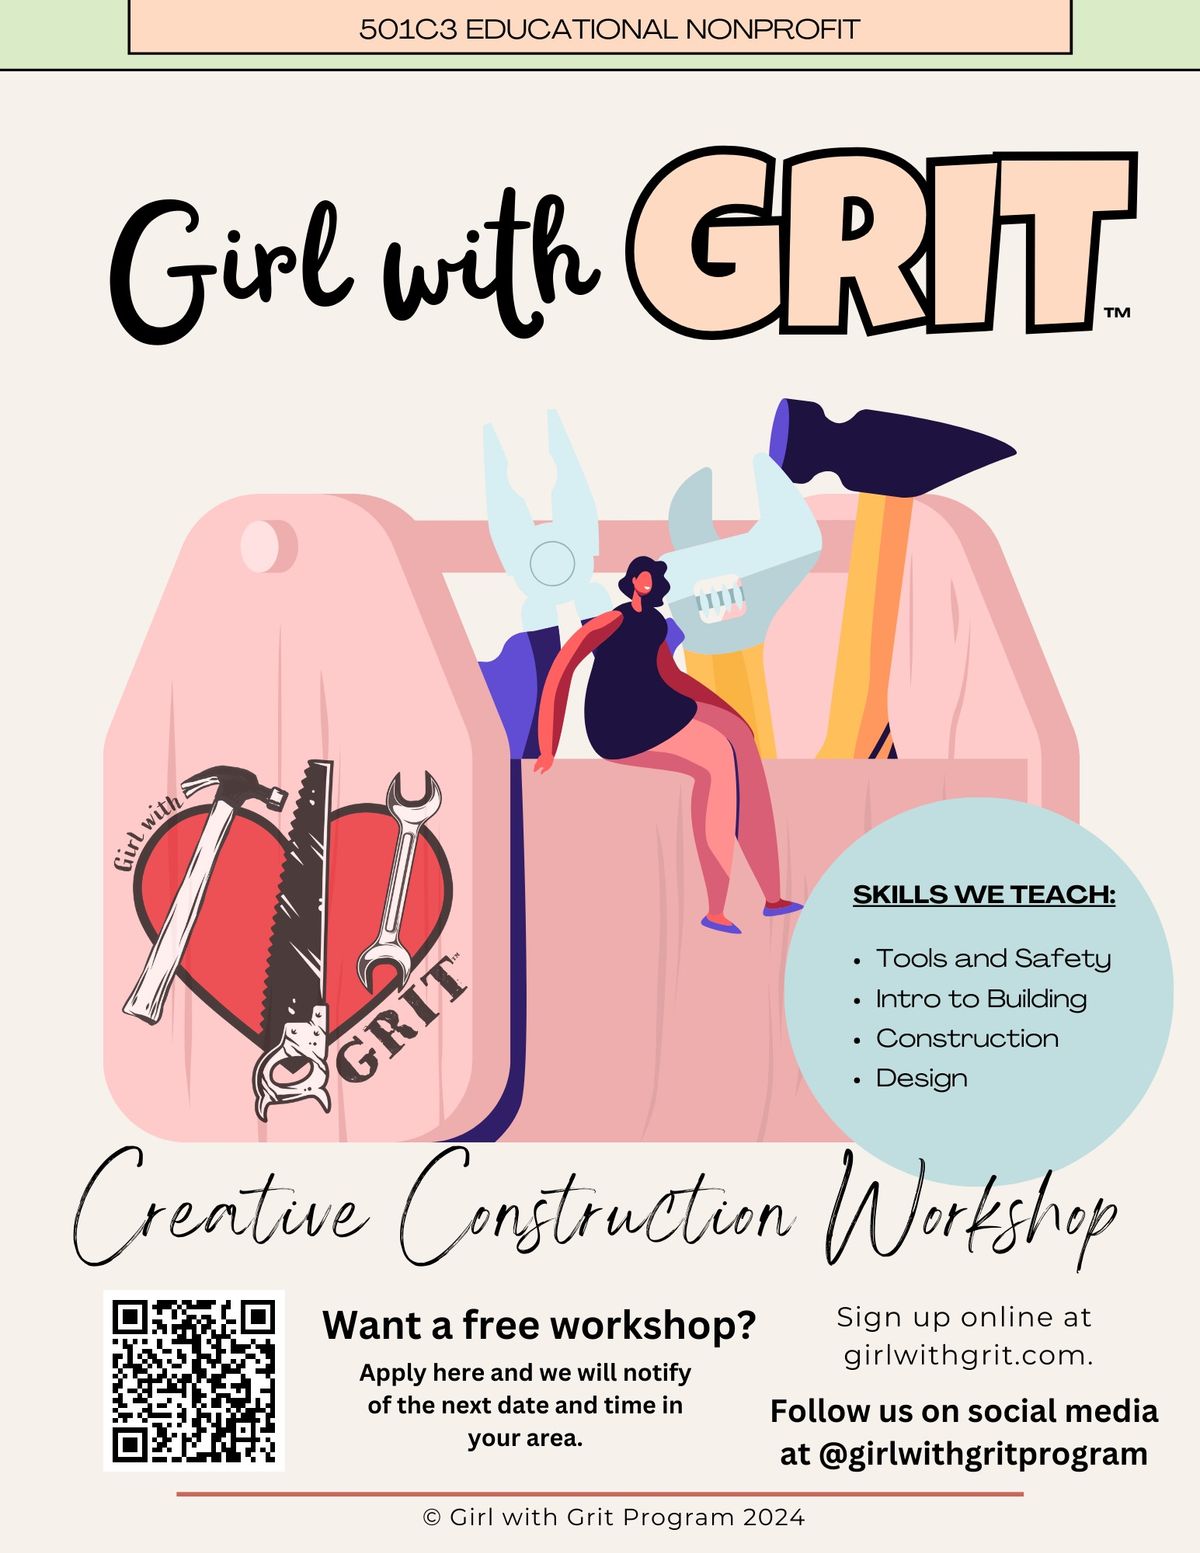 GIRL WITH GRIT CREATIVE CONSTRUCTION WORKSHOP \u2013 DALLAS, TX - Sponsored by MSC Direct